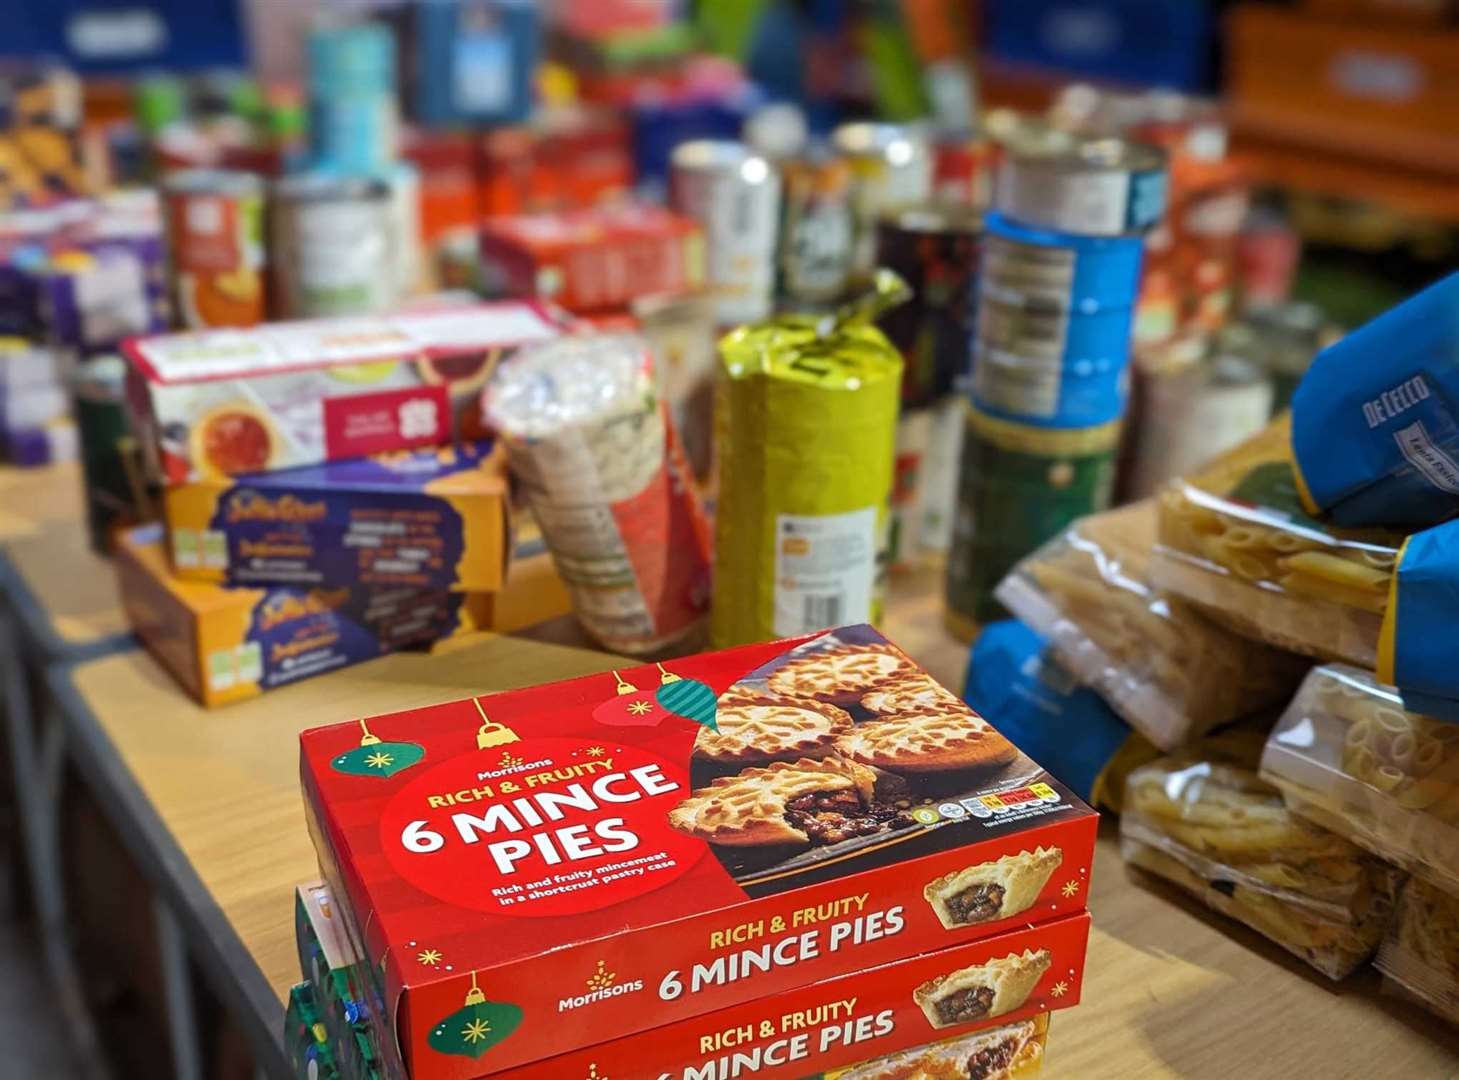 Haverhill Foodbank received 4.4 tonnes of donated items through its Christmas Appeal.Contributed picture